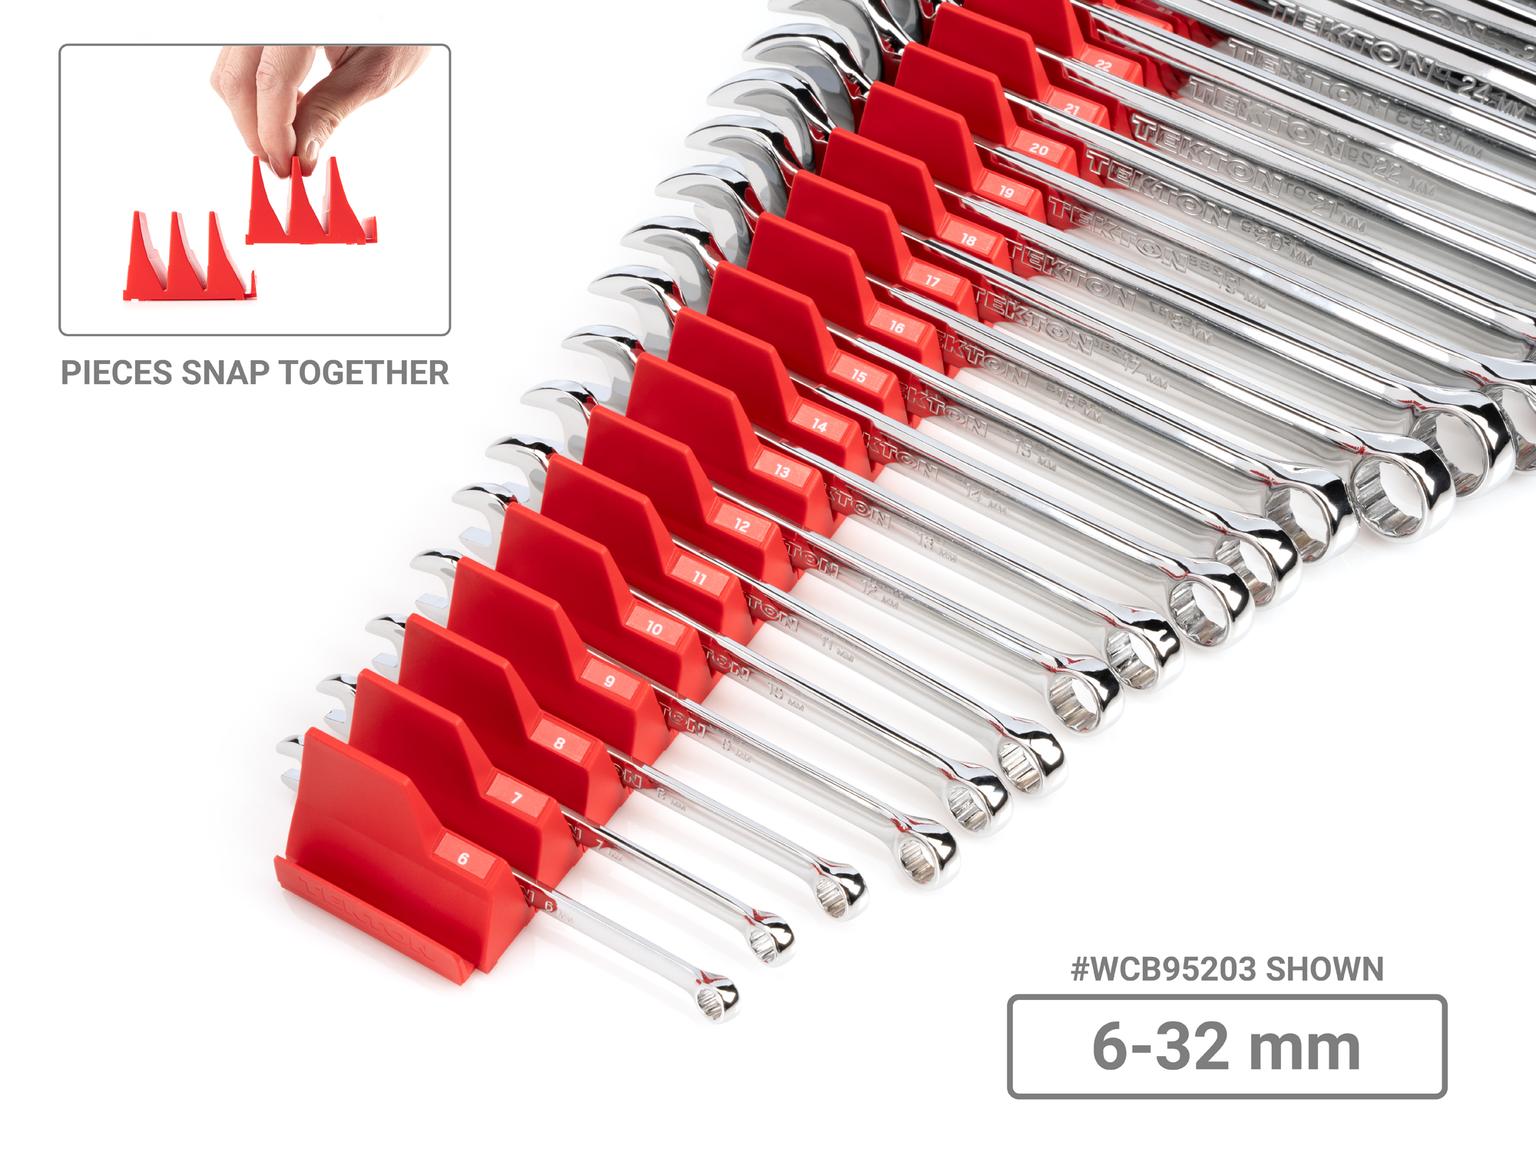 TEKTON WCB95203-T Combination Wrench Set with Modular Slotted Organizer, 27-Piece (6 - 32 mm)